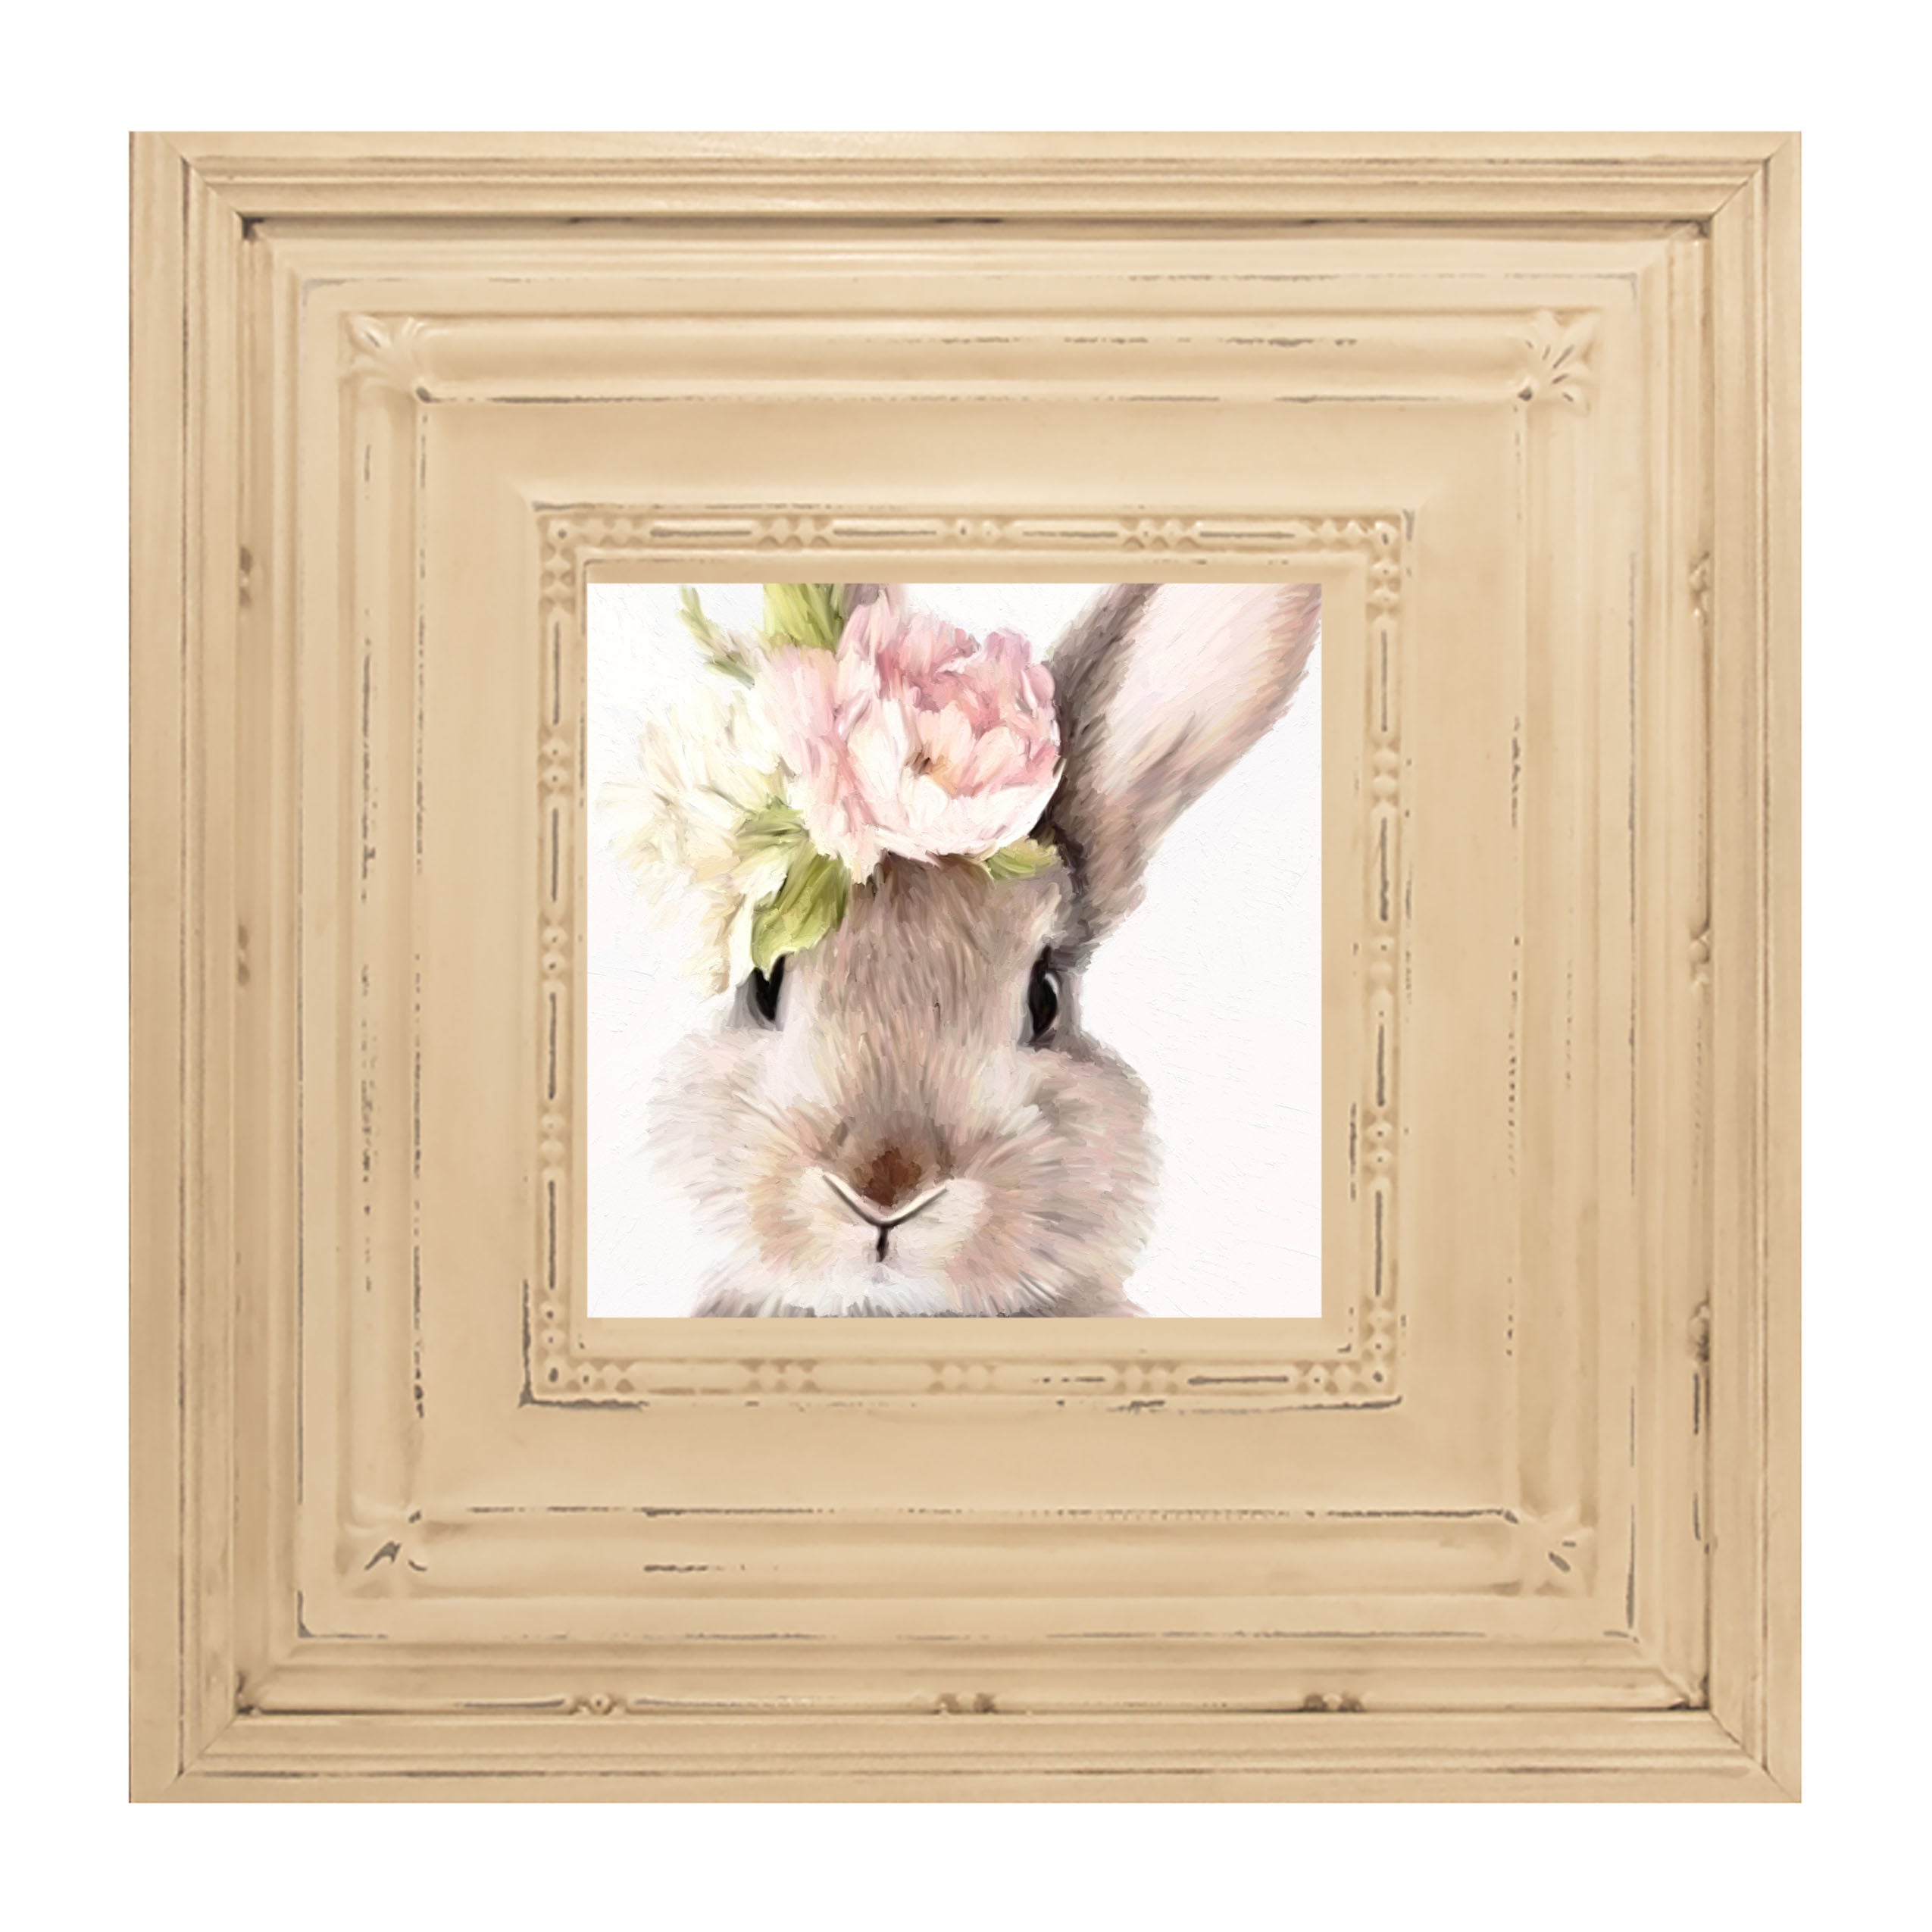 Bunny with Peonies